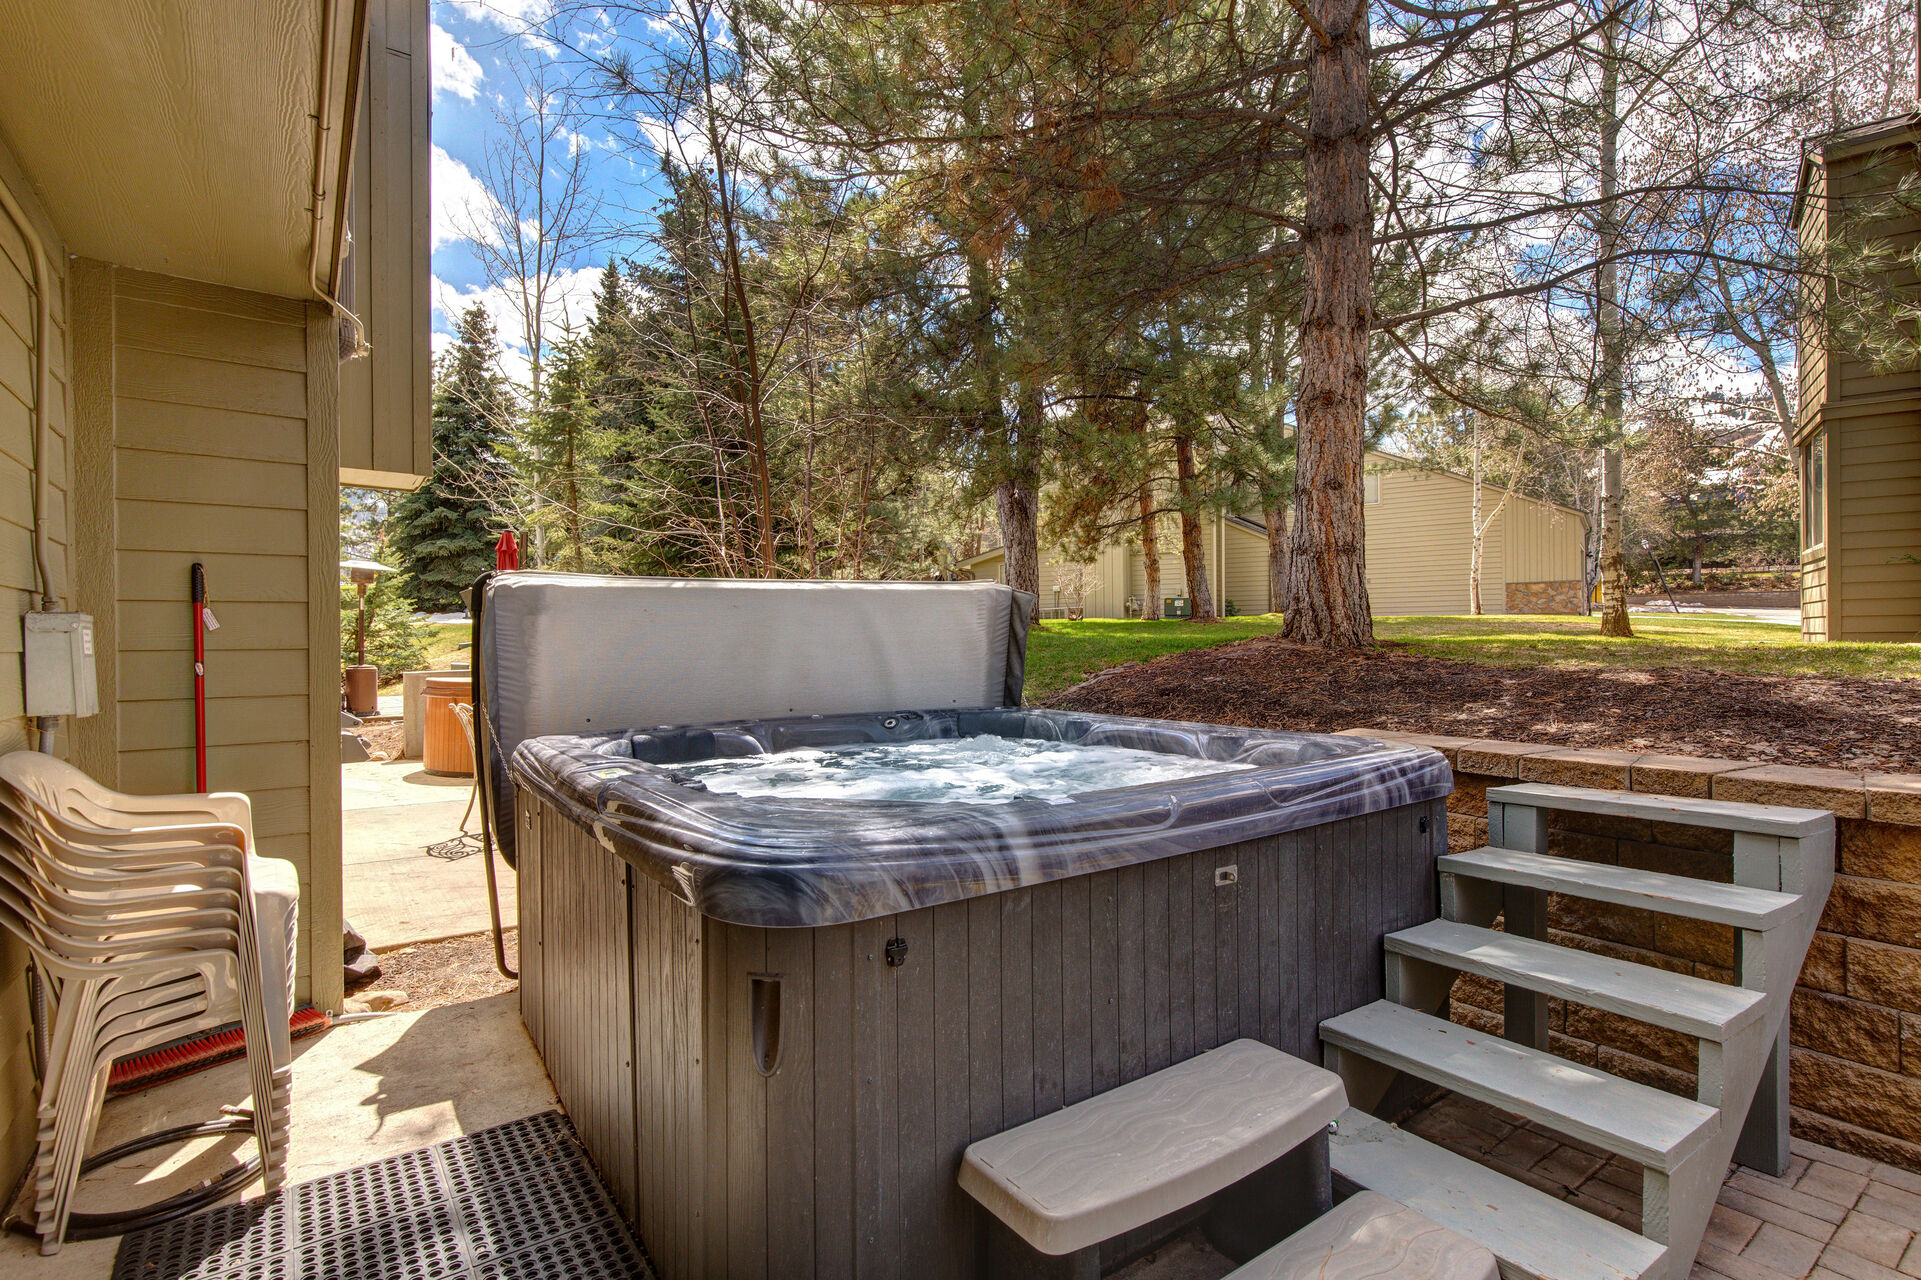 Private back patio with hot tub, seating for four, fire pit, and BBQ grill